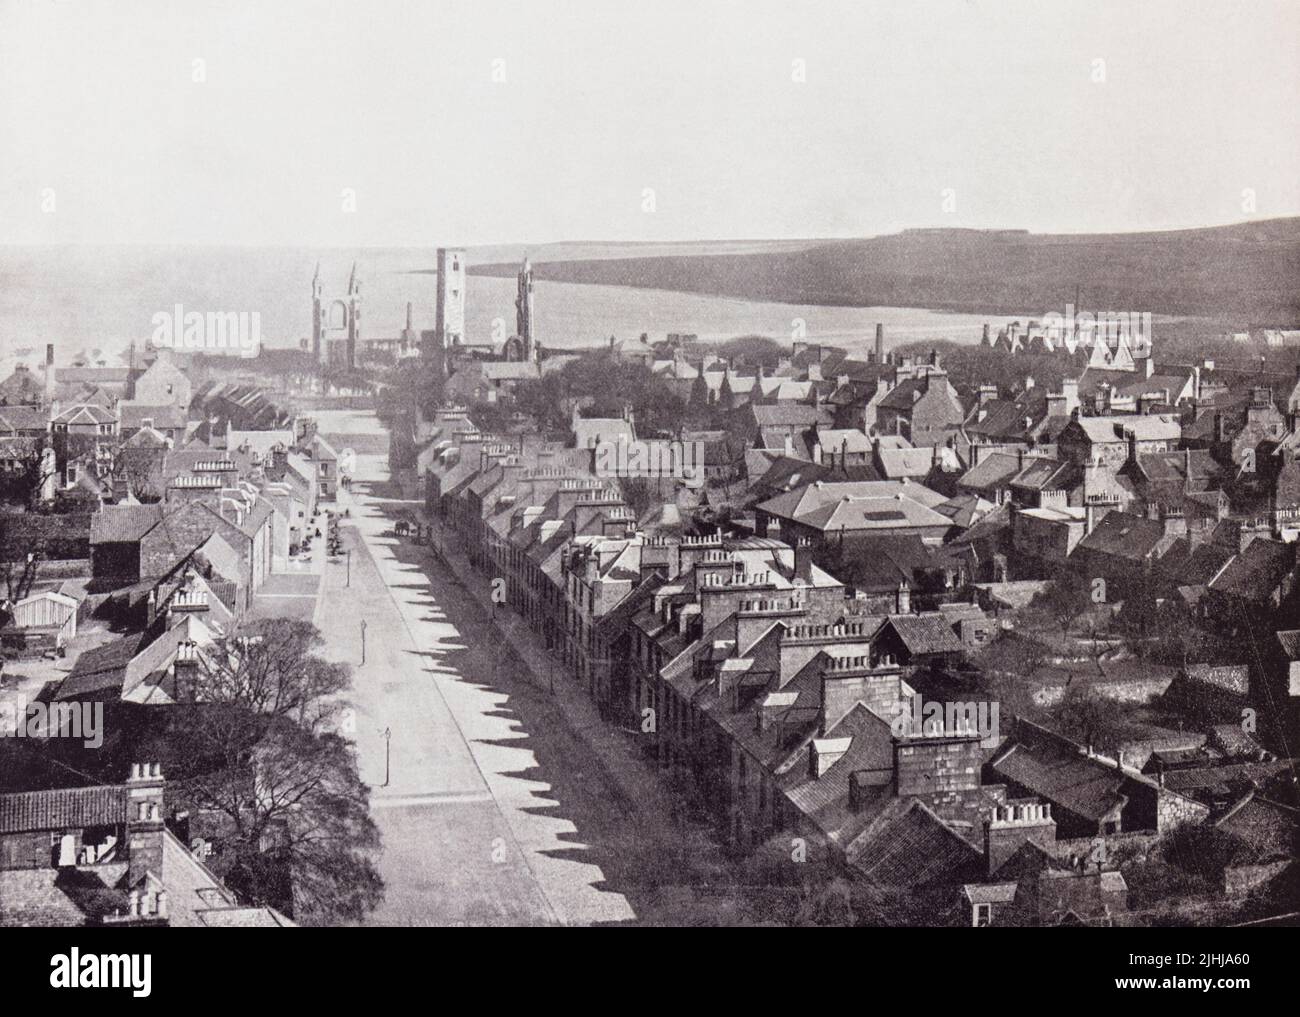 St. Andrews, Fife, Scotland.  View of the town in the 19th century from College Church Tower.  From Around The Coast,  An Album of Pictures from Photographs of the Chief Seaside Places of Interest in Great Britain and Ireland published London, 1895, by George Newnes Limited. Stock Photo